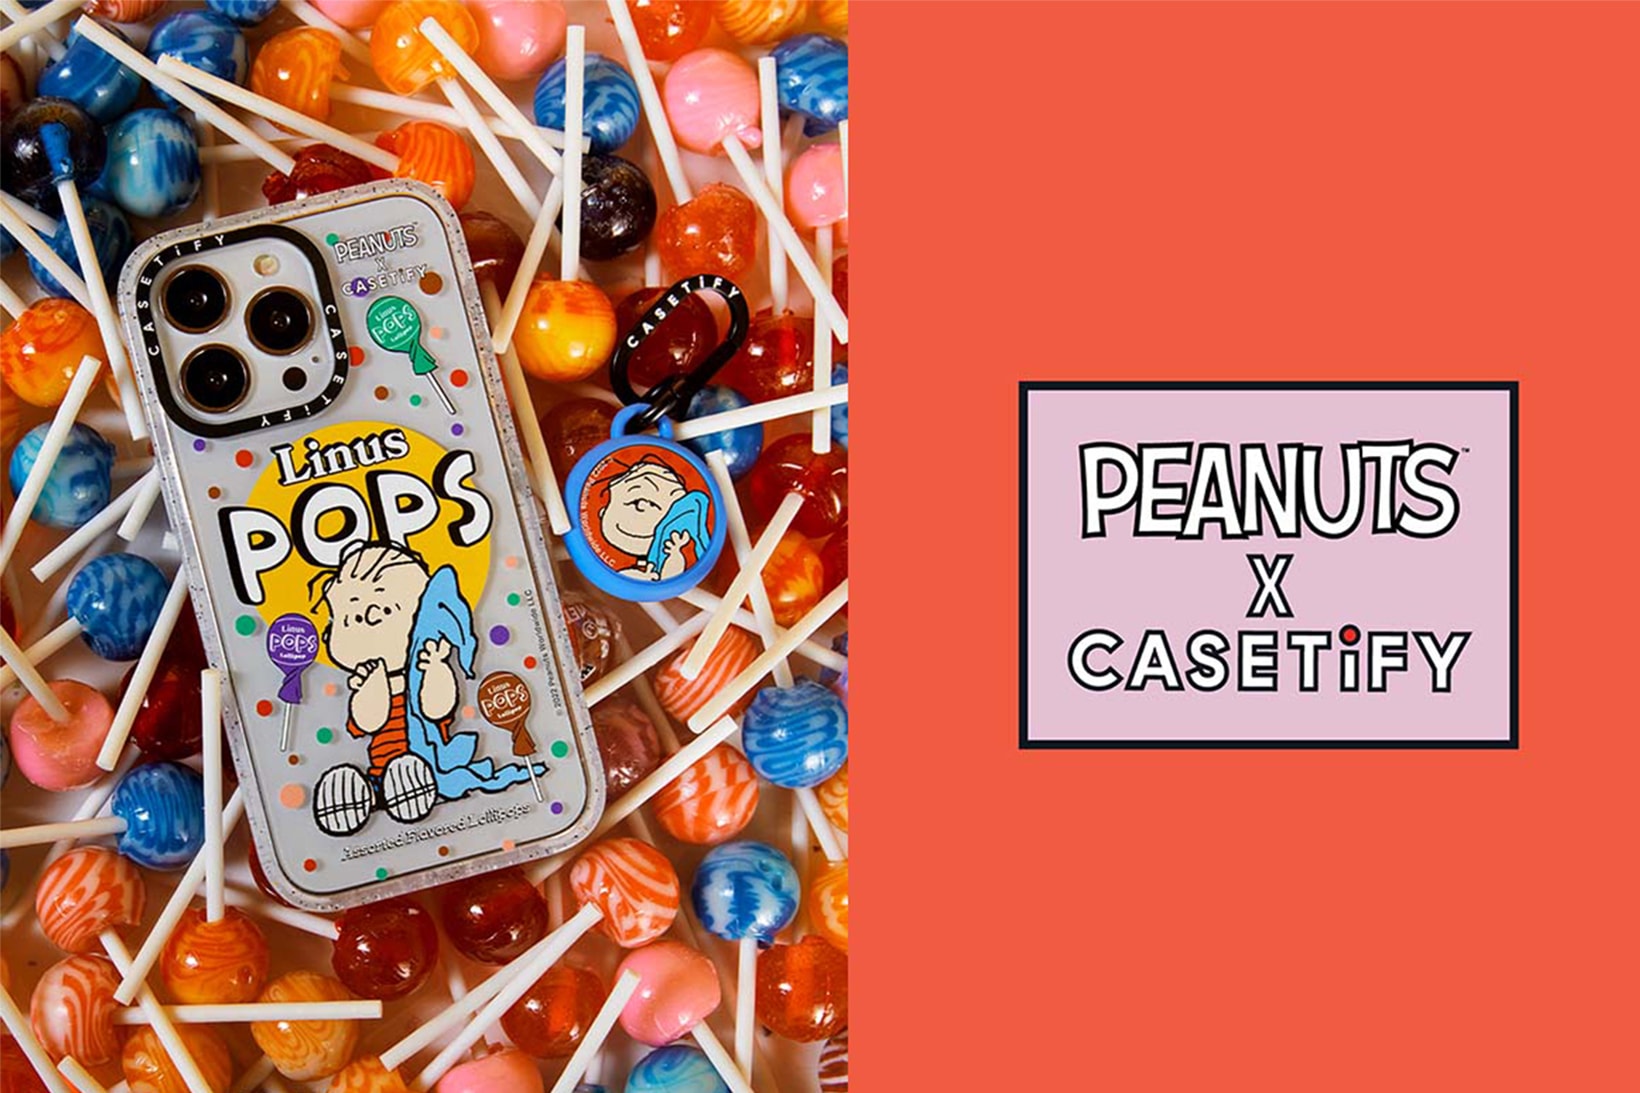 Casetify Peanuts Snoopy Collaboration Accessories Case Linus Pops